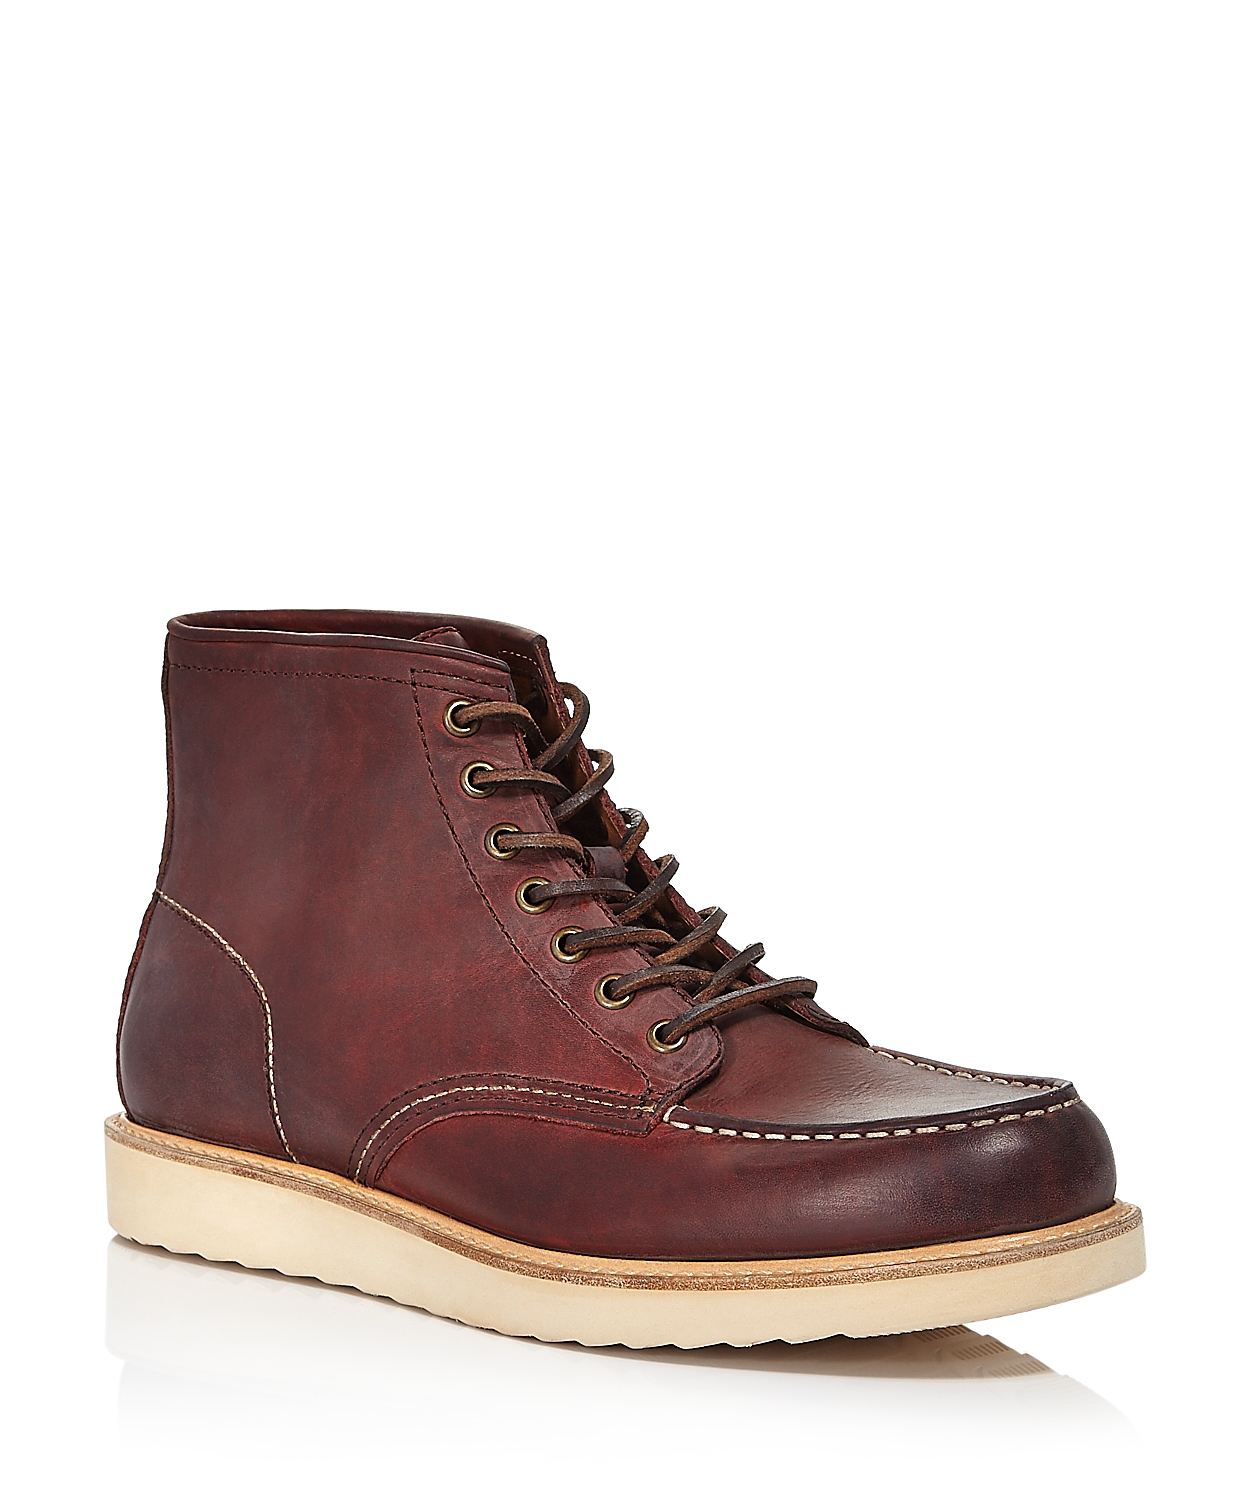 woocommerce-673321-2209615.cloudwaysapps.com-the-mens-store-mens-brown-leather-wyatt-wedge-boots